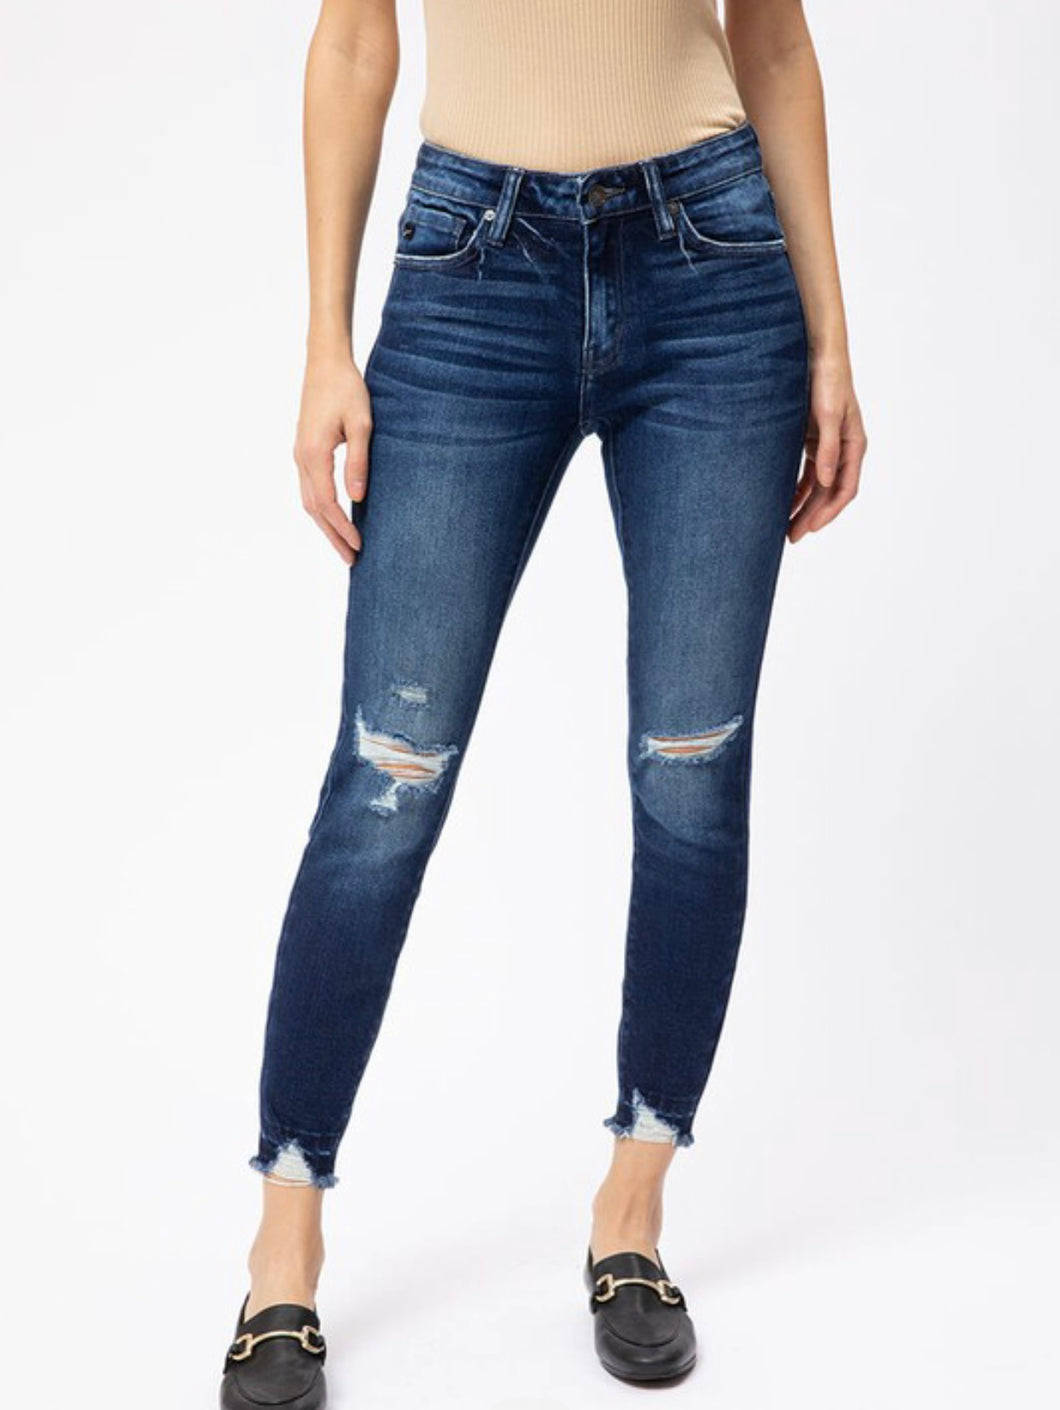 JENNY Kan Can Mid Rise Ankle Skinny Jeans w/exposed hem